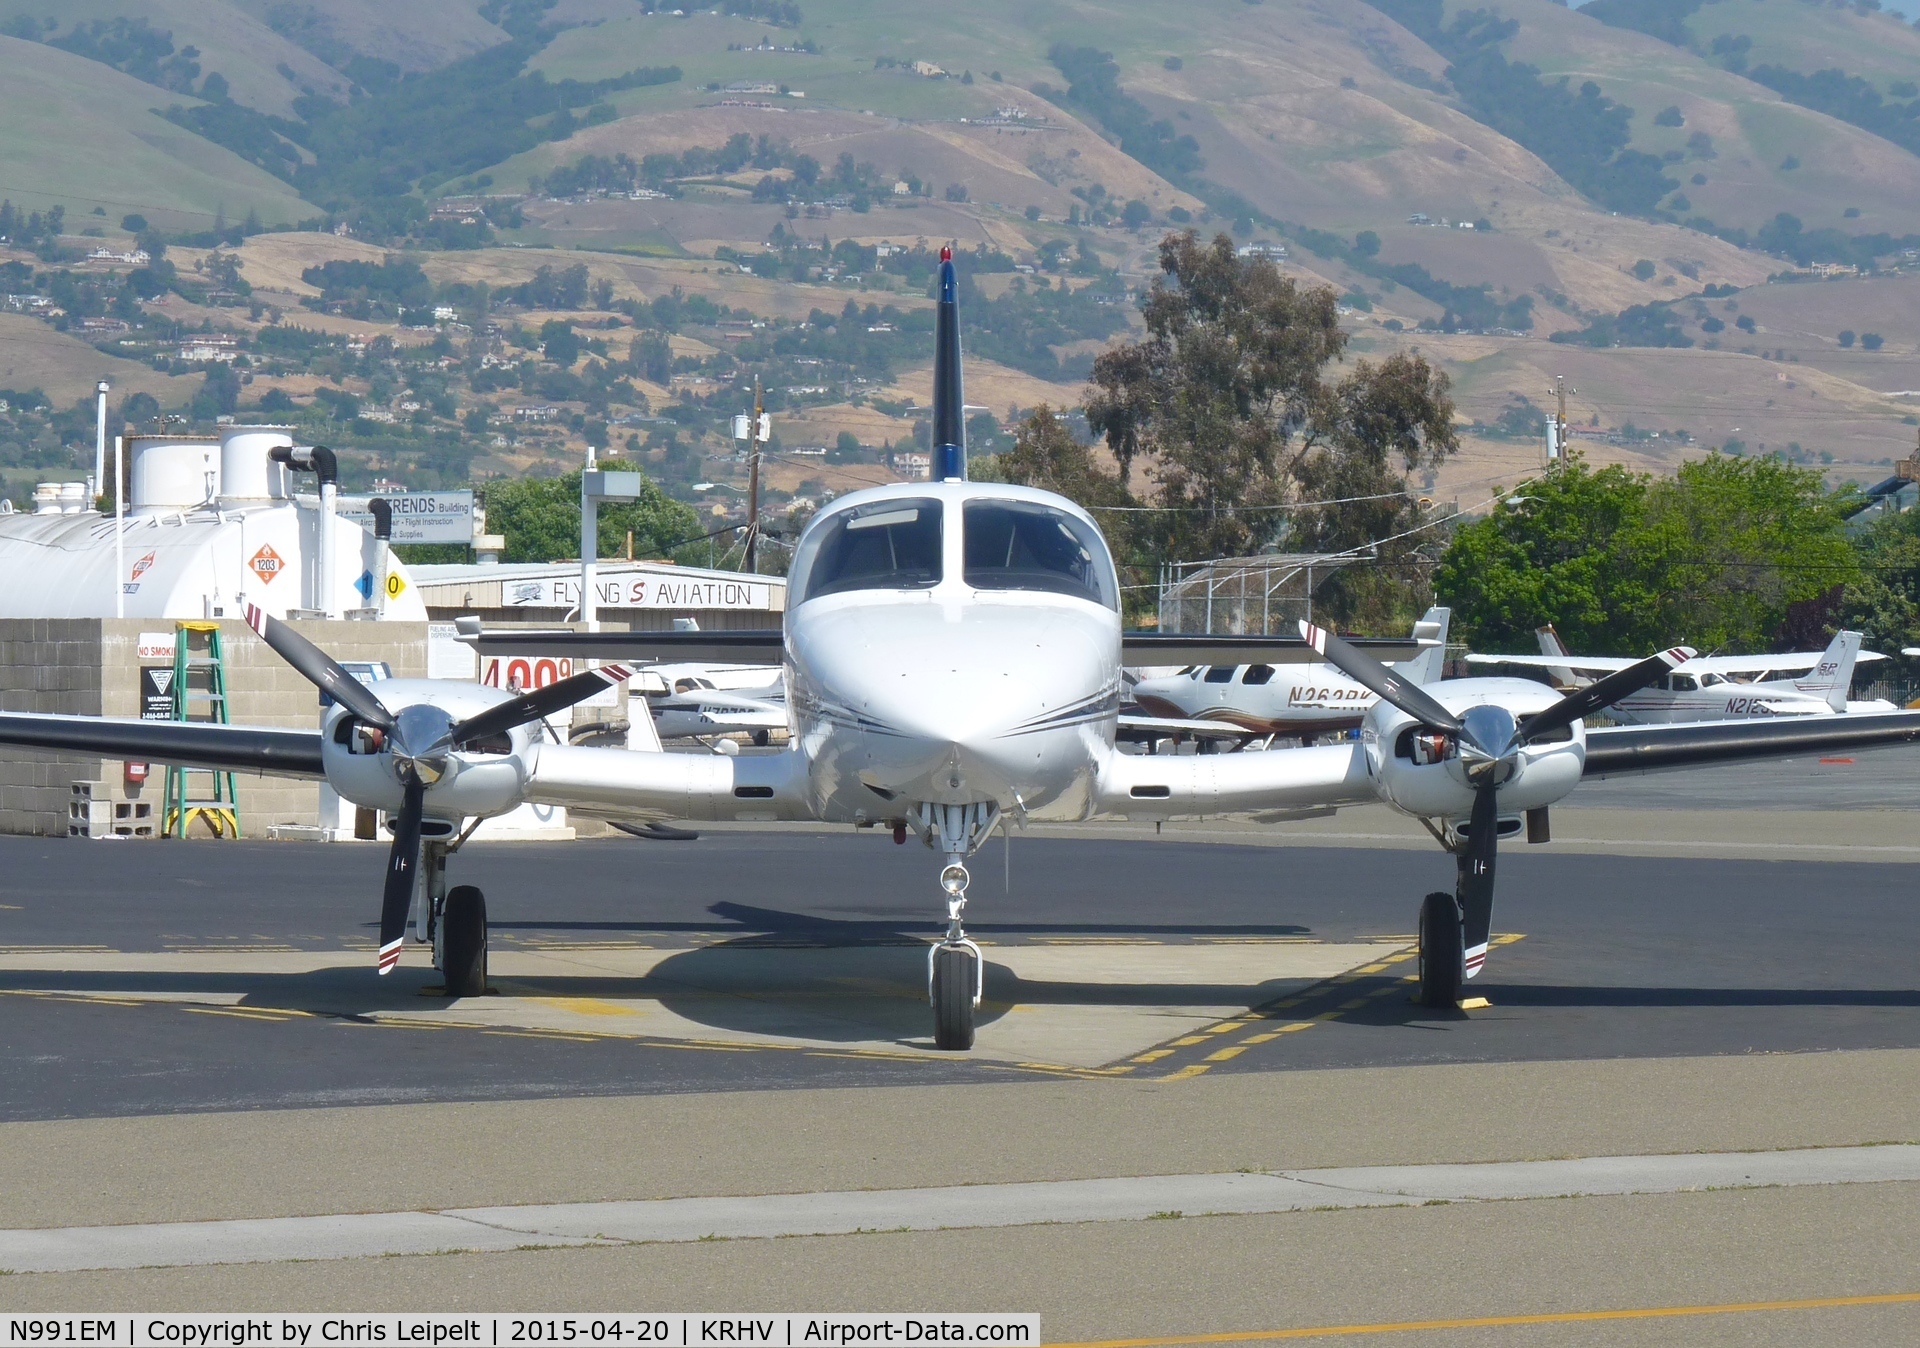 N991EM, Cessna 414 Chancellor C/N 414-0948, A transient Cessna 414 (FABULOUS FIVE INC - OVERLAND PARK, KS) parked at Nice Air at Reid Hillview Airport, CA.